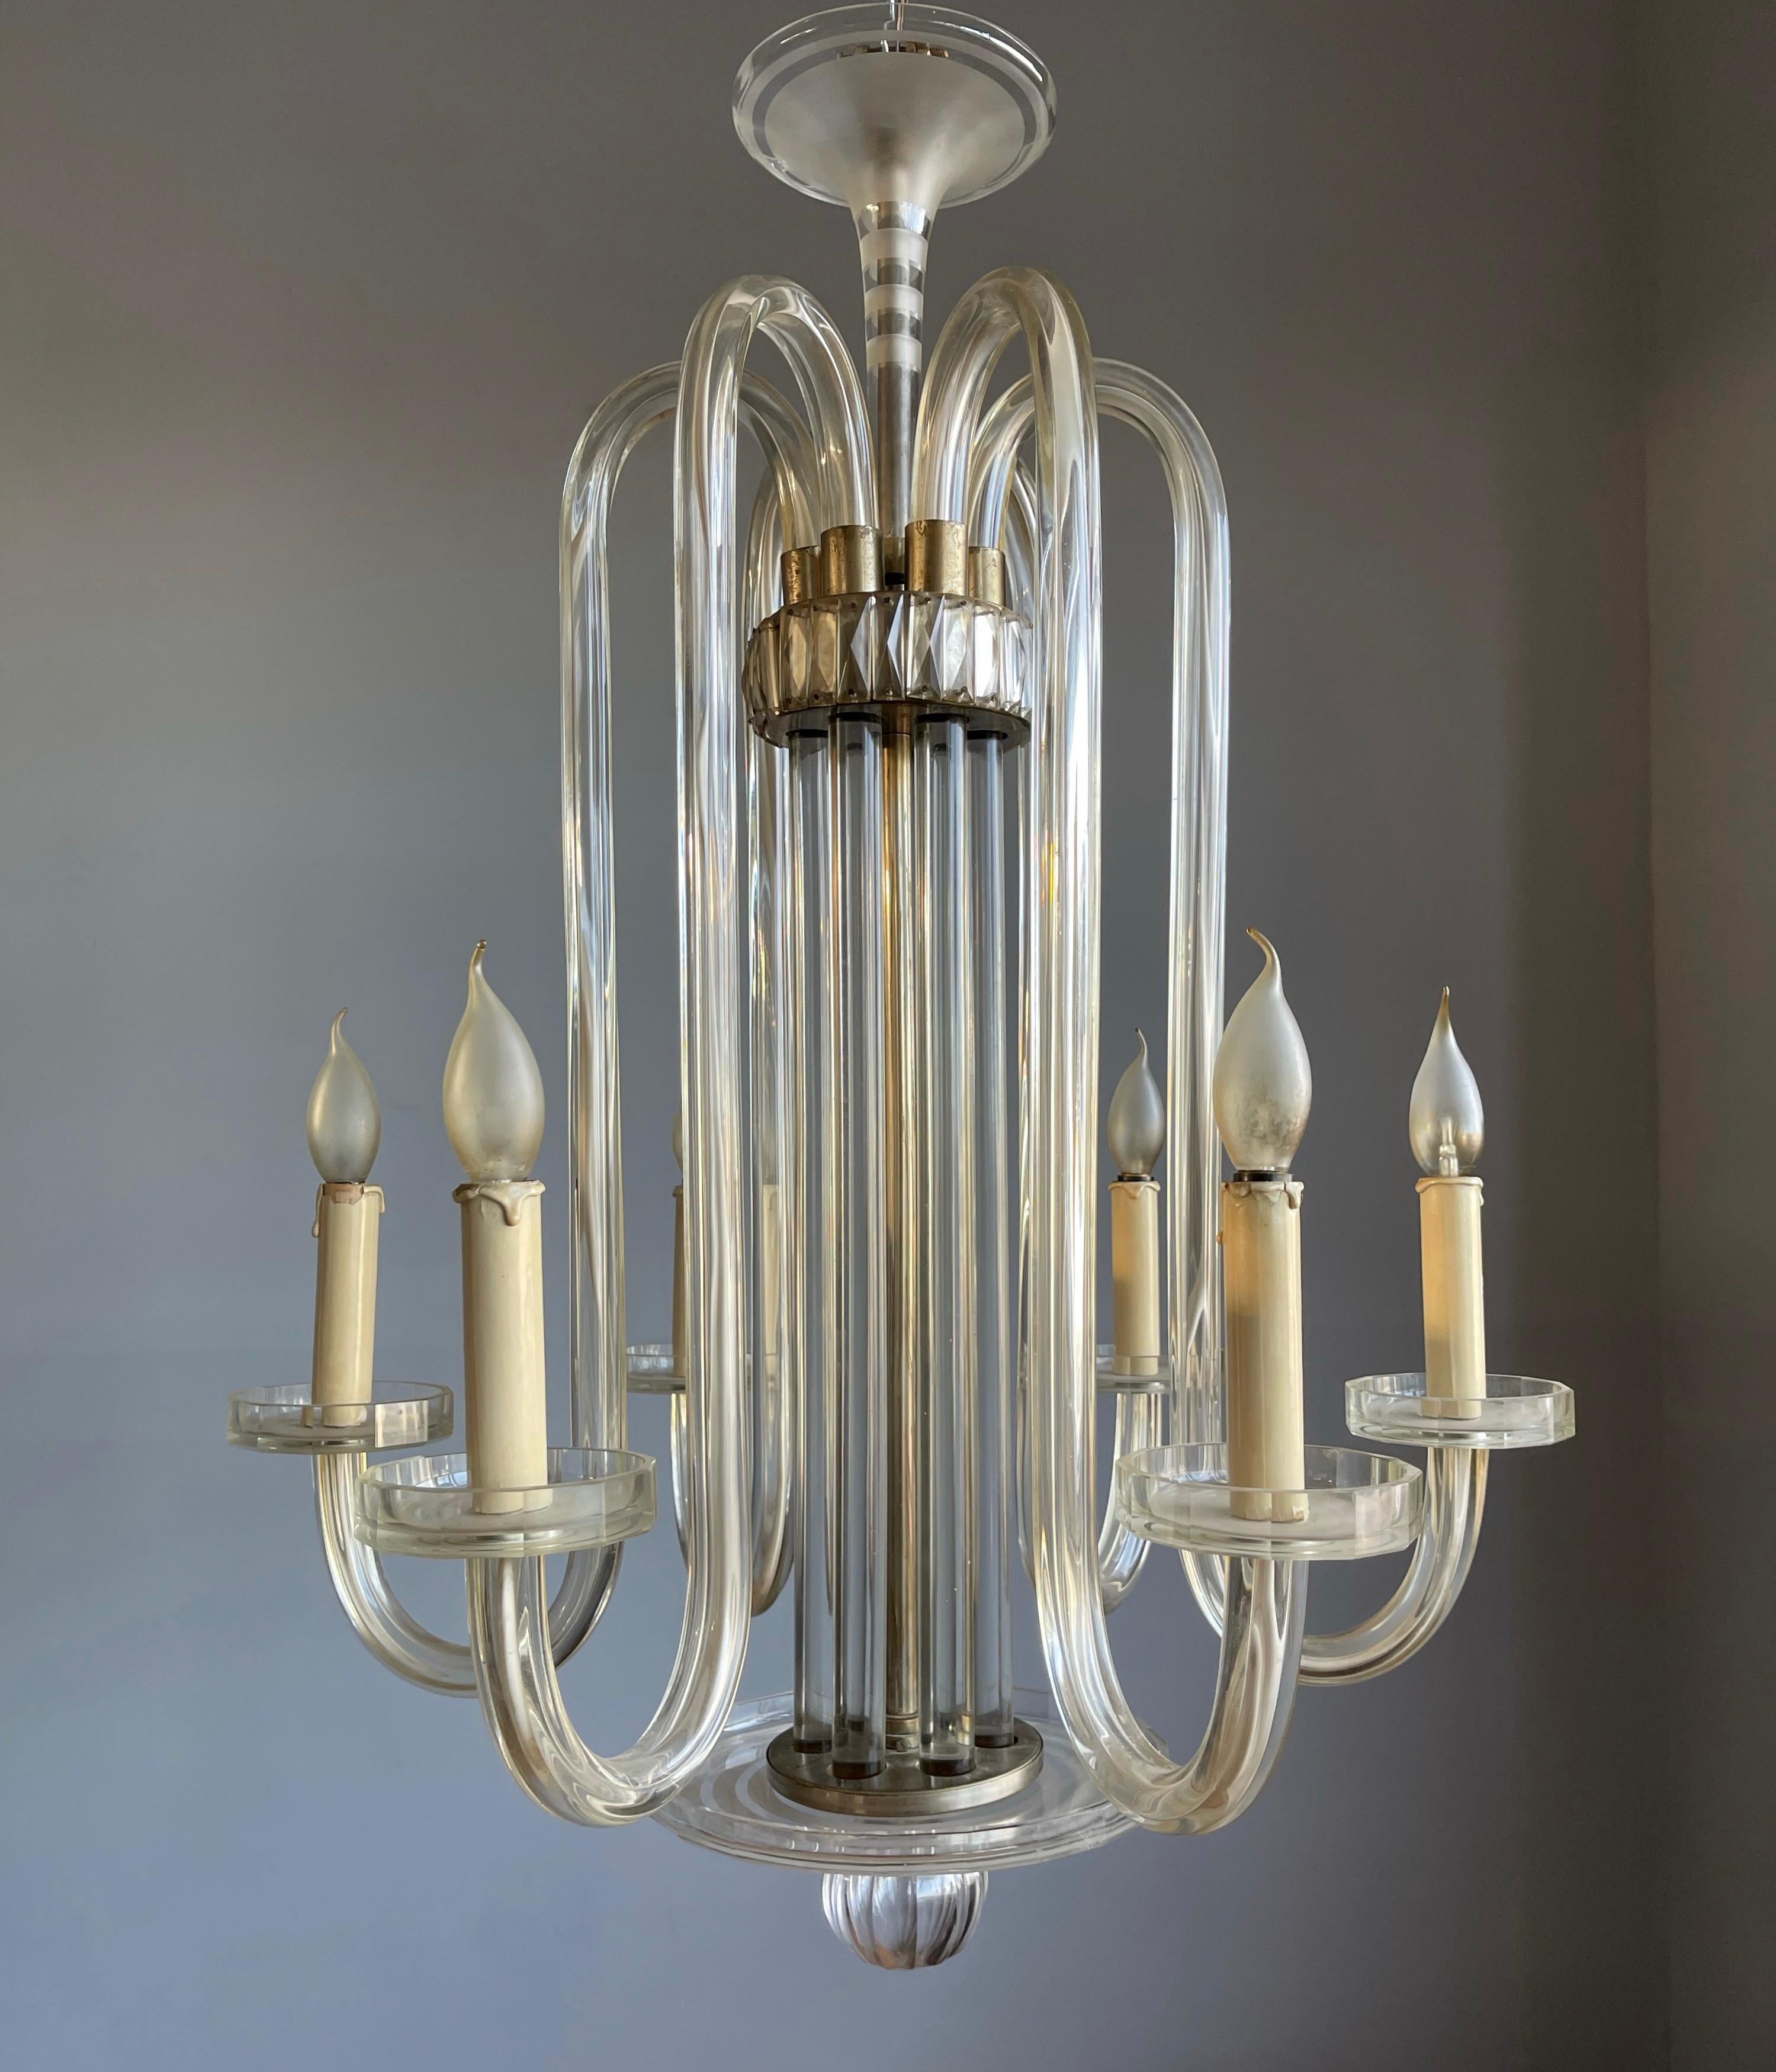 Everything about this unique and monumental, mouthblown art glass chandelier breathes class, quality and beauty.

If you are looking for the best and the best only then this amazing quality Murano chandelier could be yours to own and enjoy soon. Out